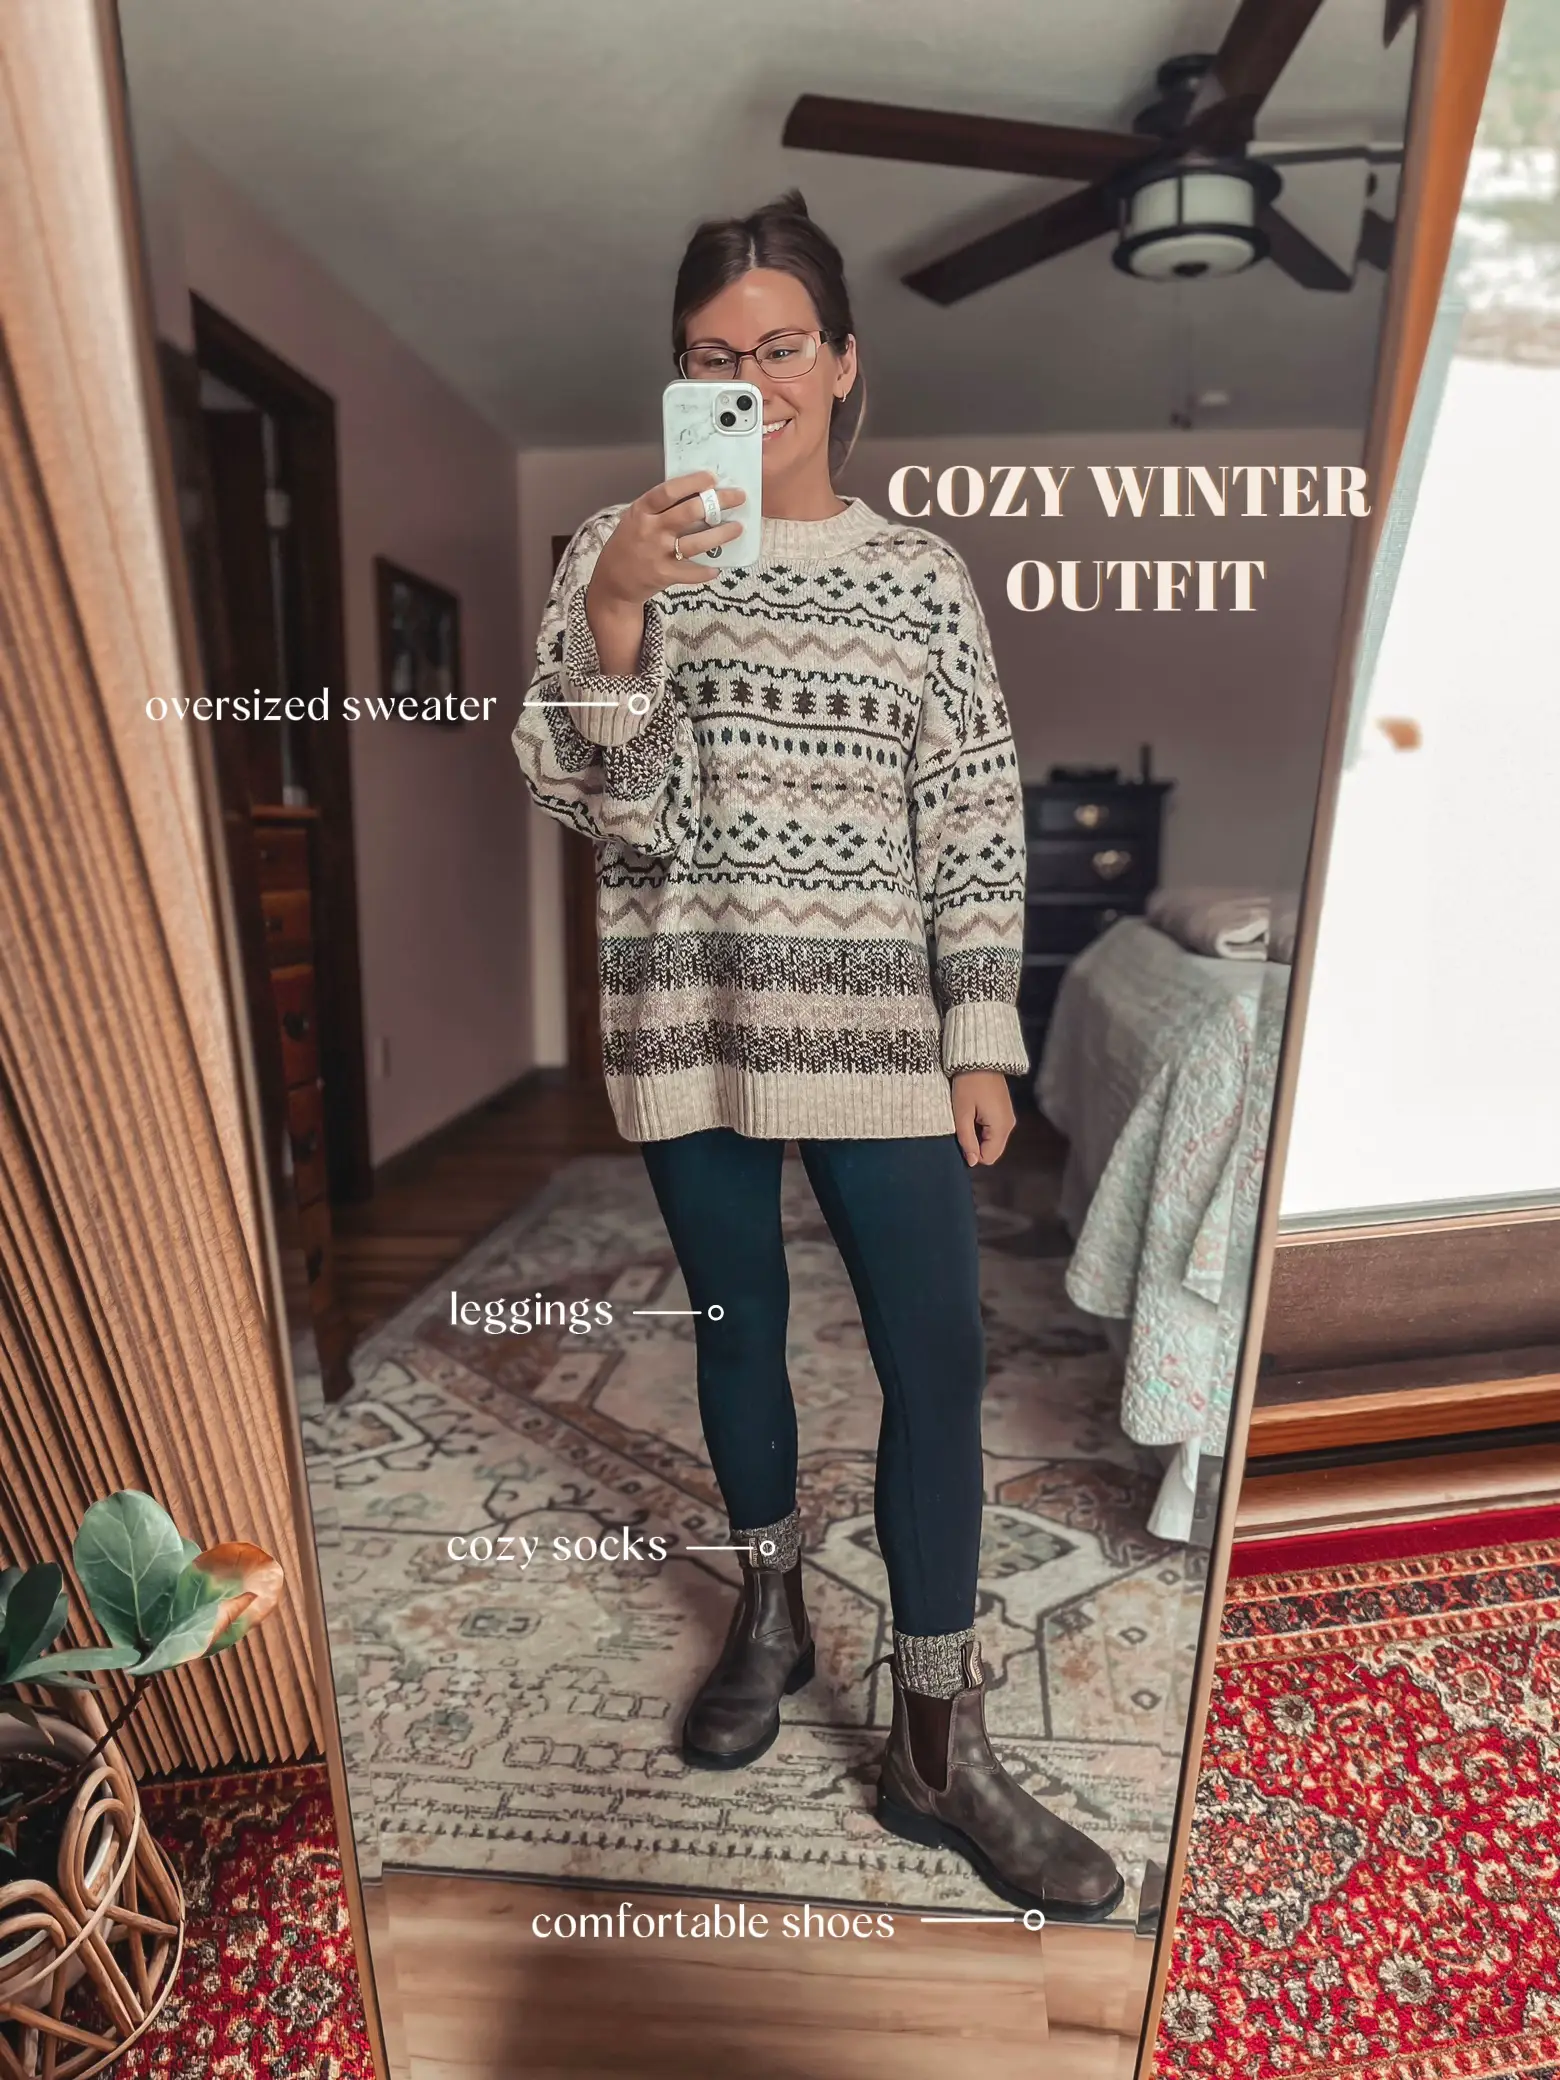 COZY WINTER OUTFIT, Gallery posted by MarissaNewvine